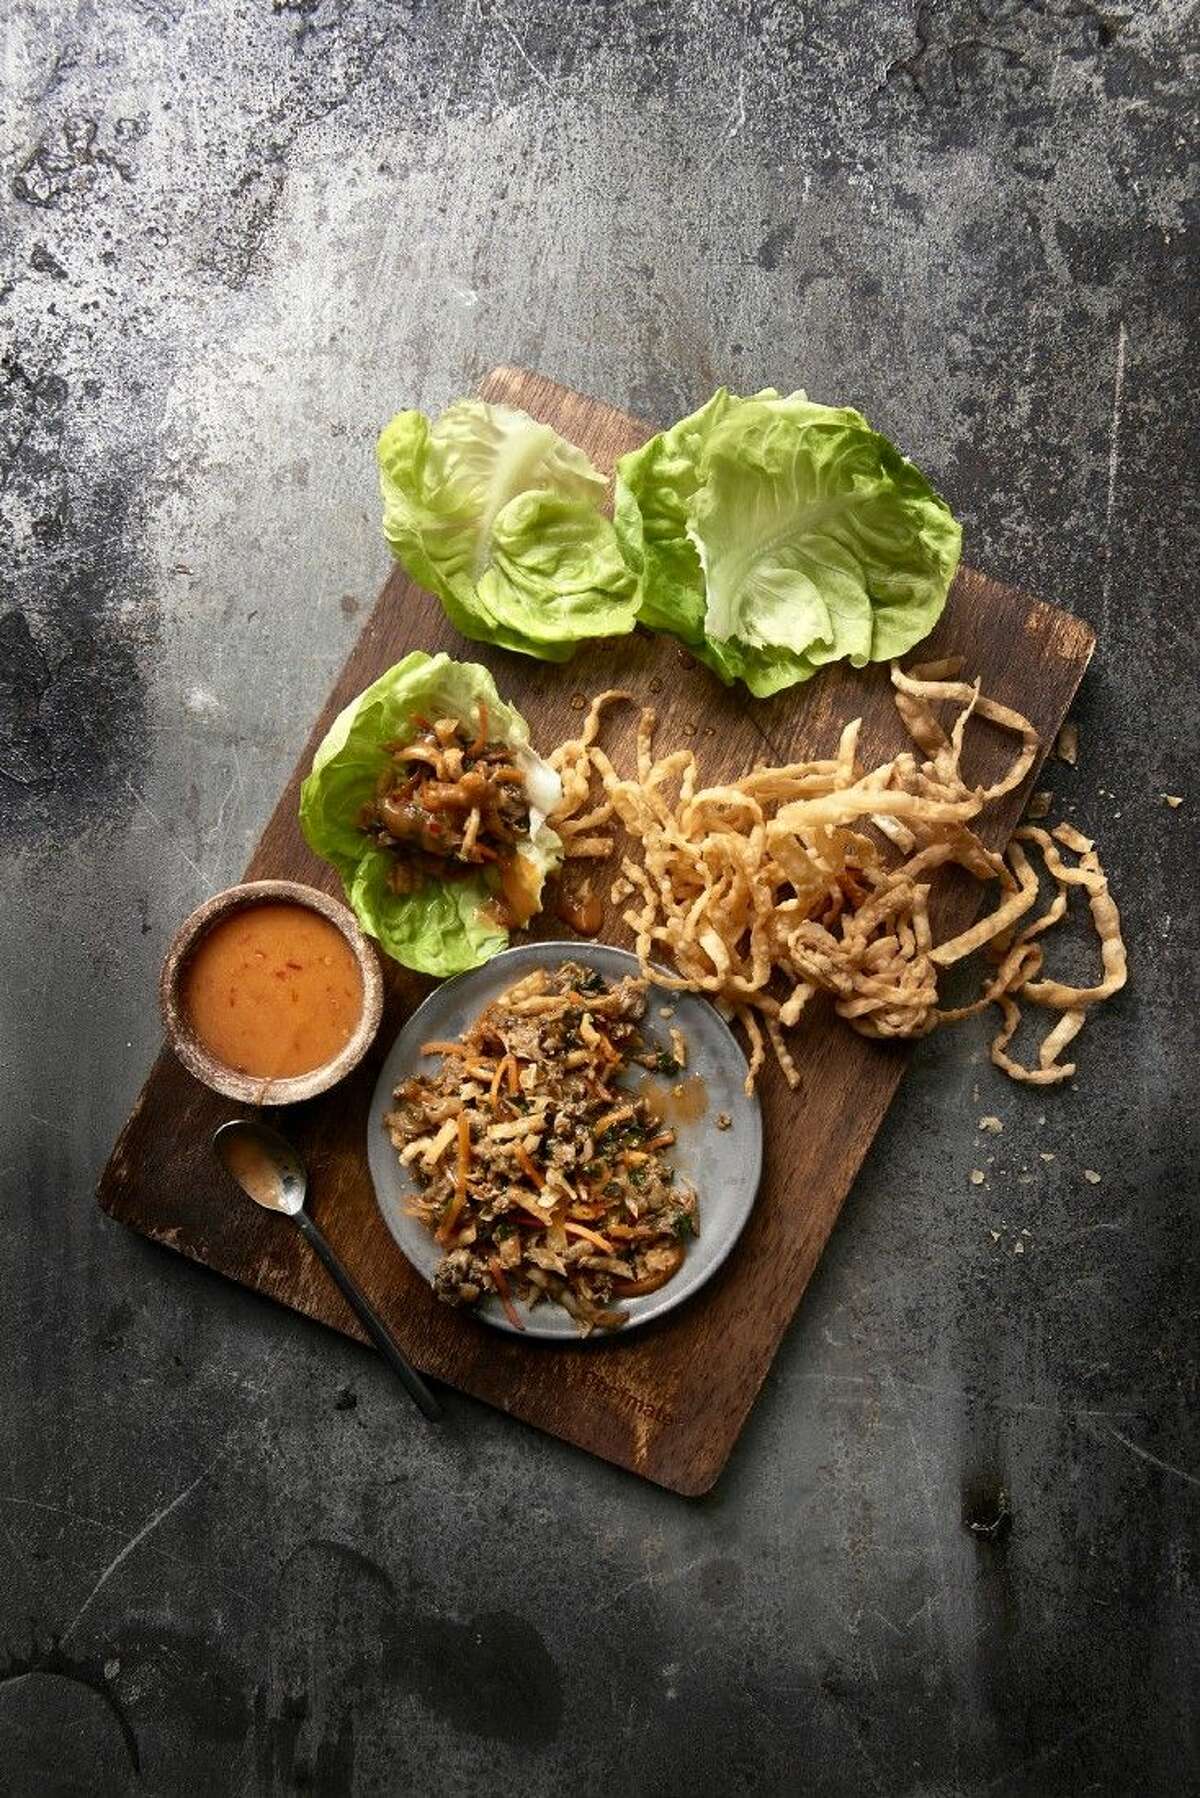 The Asian Duck wraps feature duck confit sautéed with shaved carrots, Napa cabbage, cilantro and shiitake mushrooms with house-made hoisin, crispy wonton strips, chili mustard sauce and bibb lettuce.